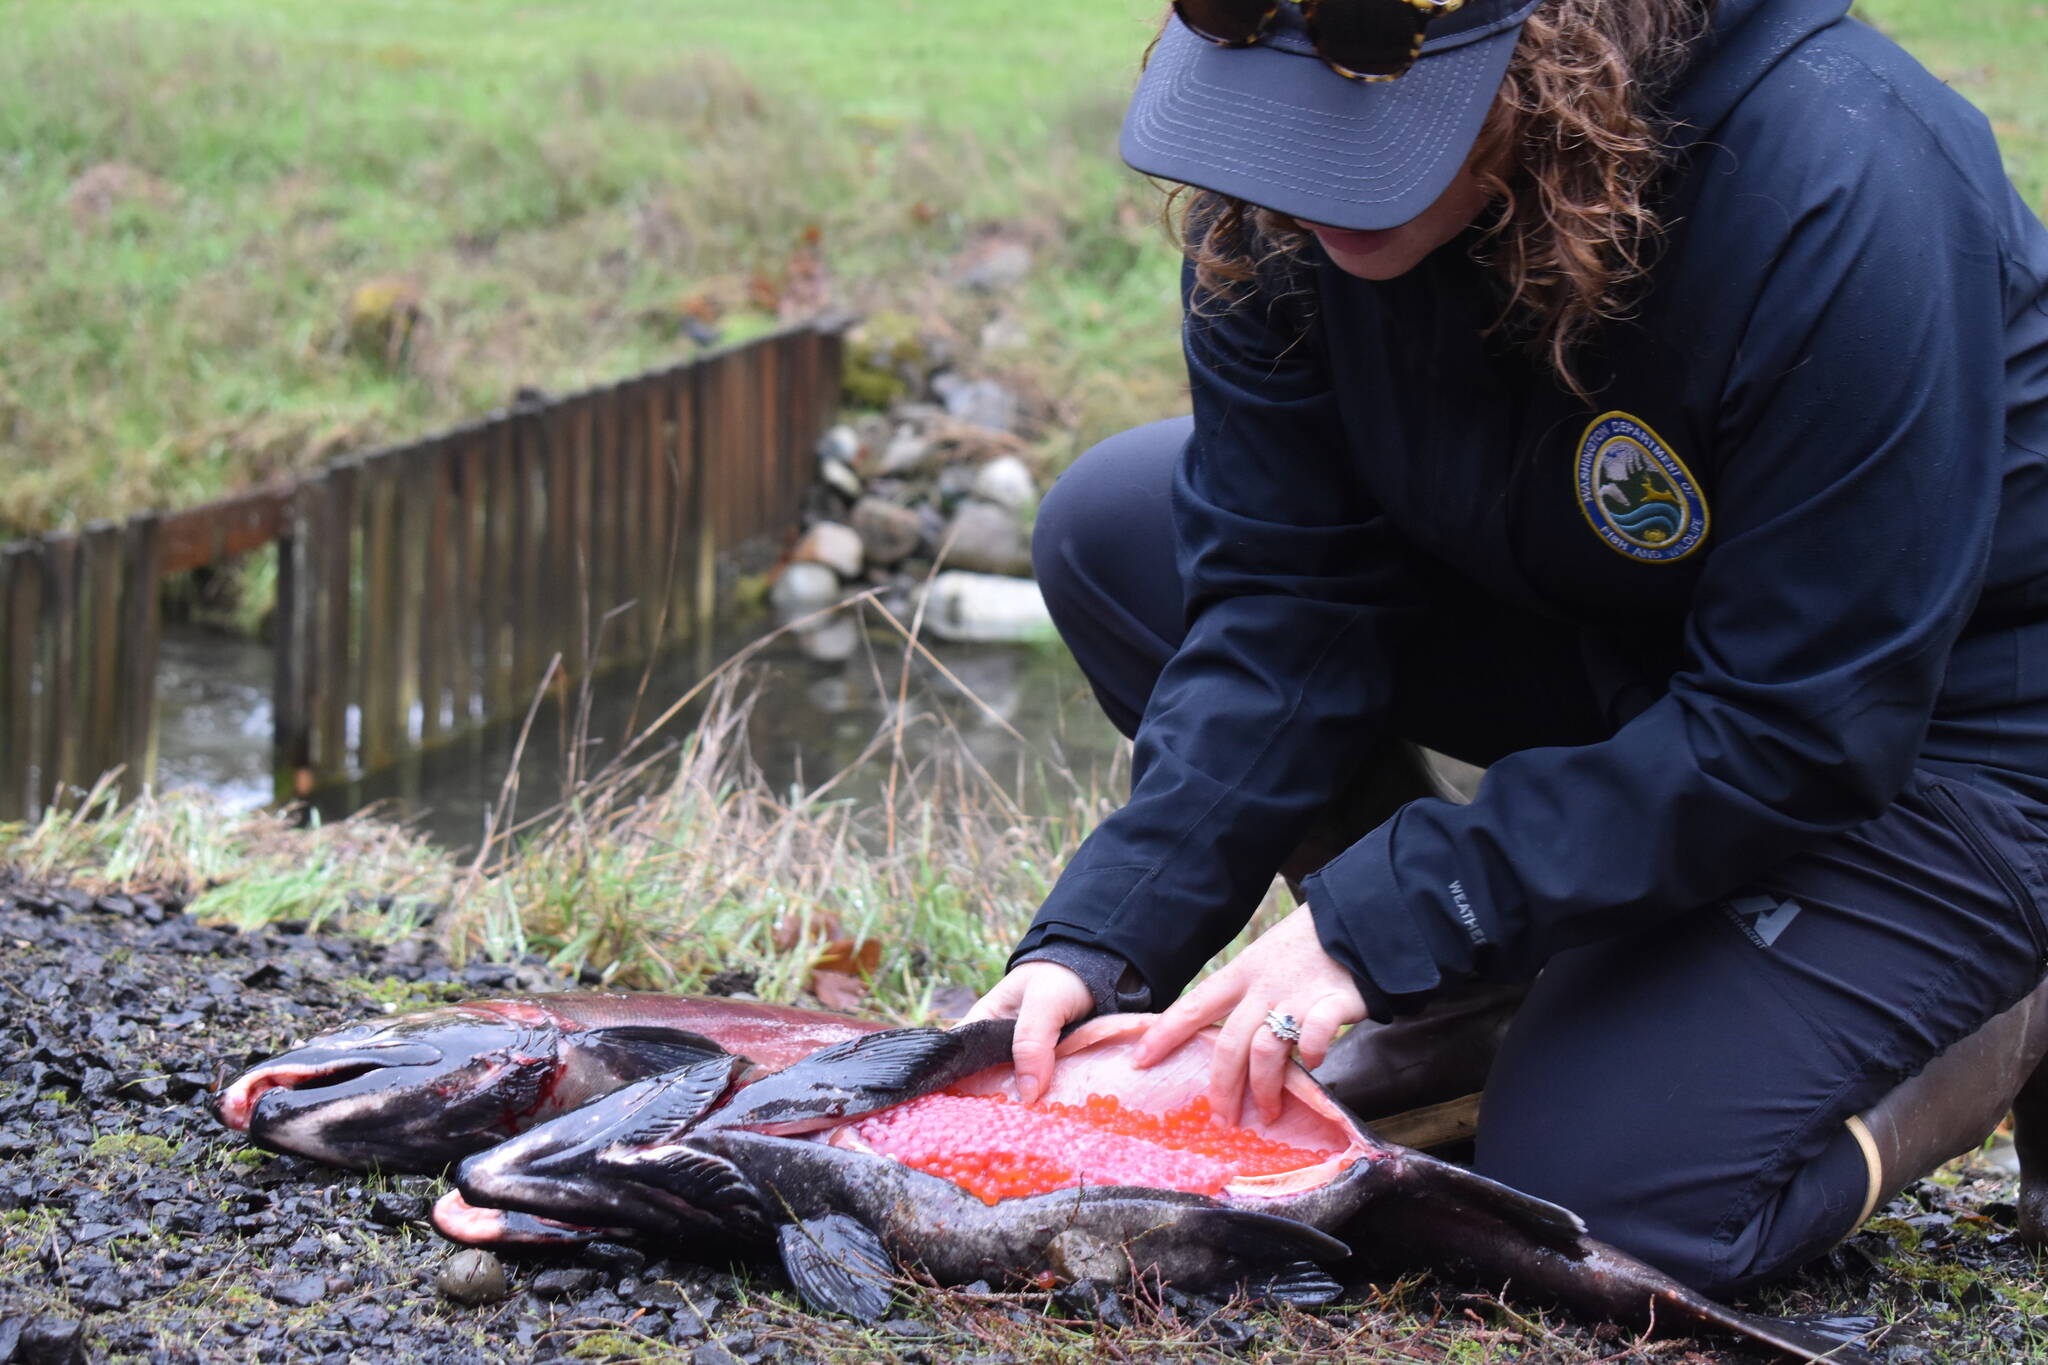 Lauren Bauernschmidt, a habitat biologist with the Washington Department of Fish and Wildlife, points out hundreds of eggs contained within the belly of a female salmon at Satsop Springs Hatchery on Saturday, Nov. 4. (Clayton Franke / The Daily World)